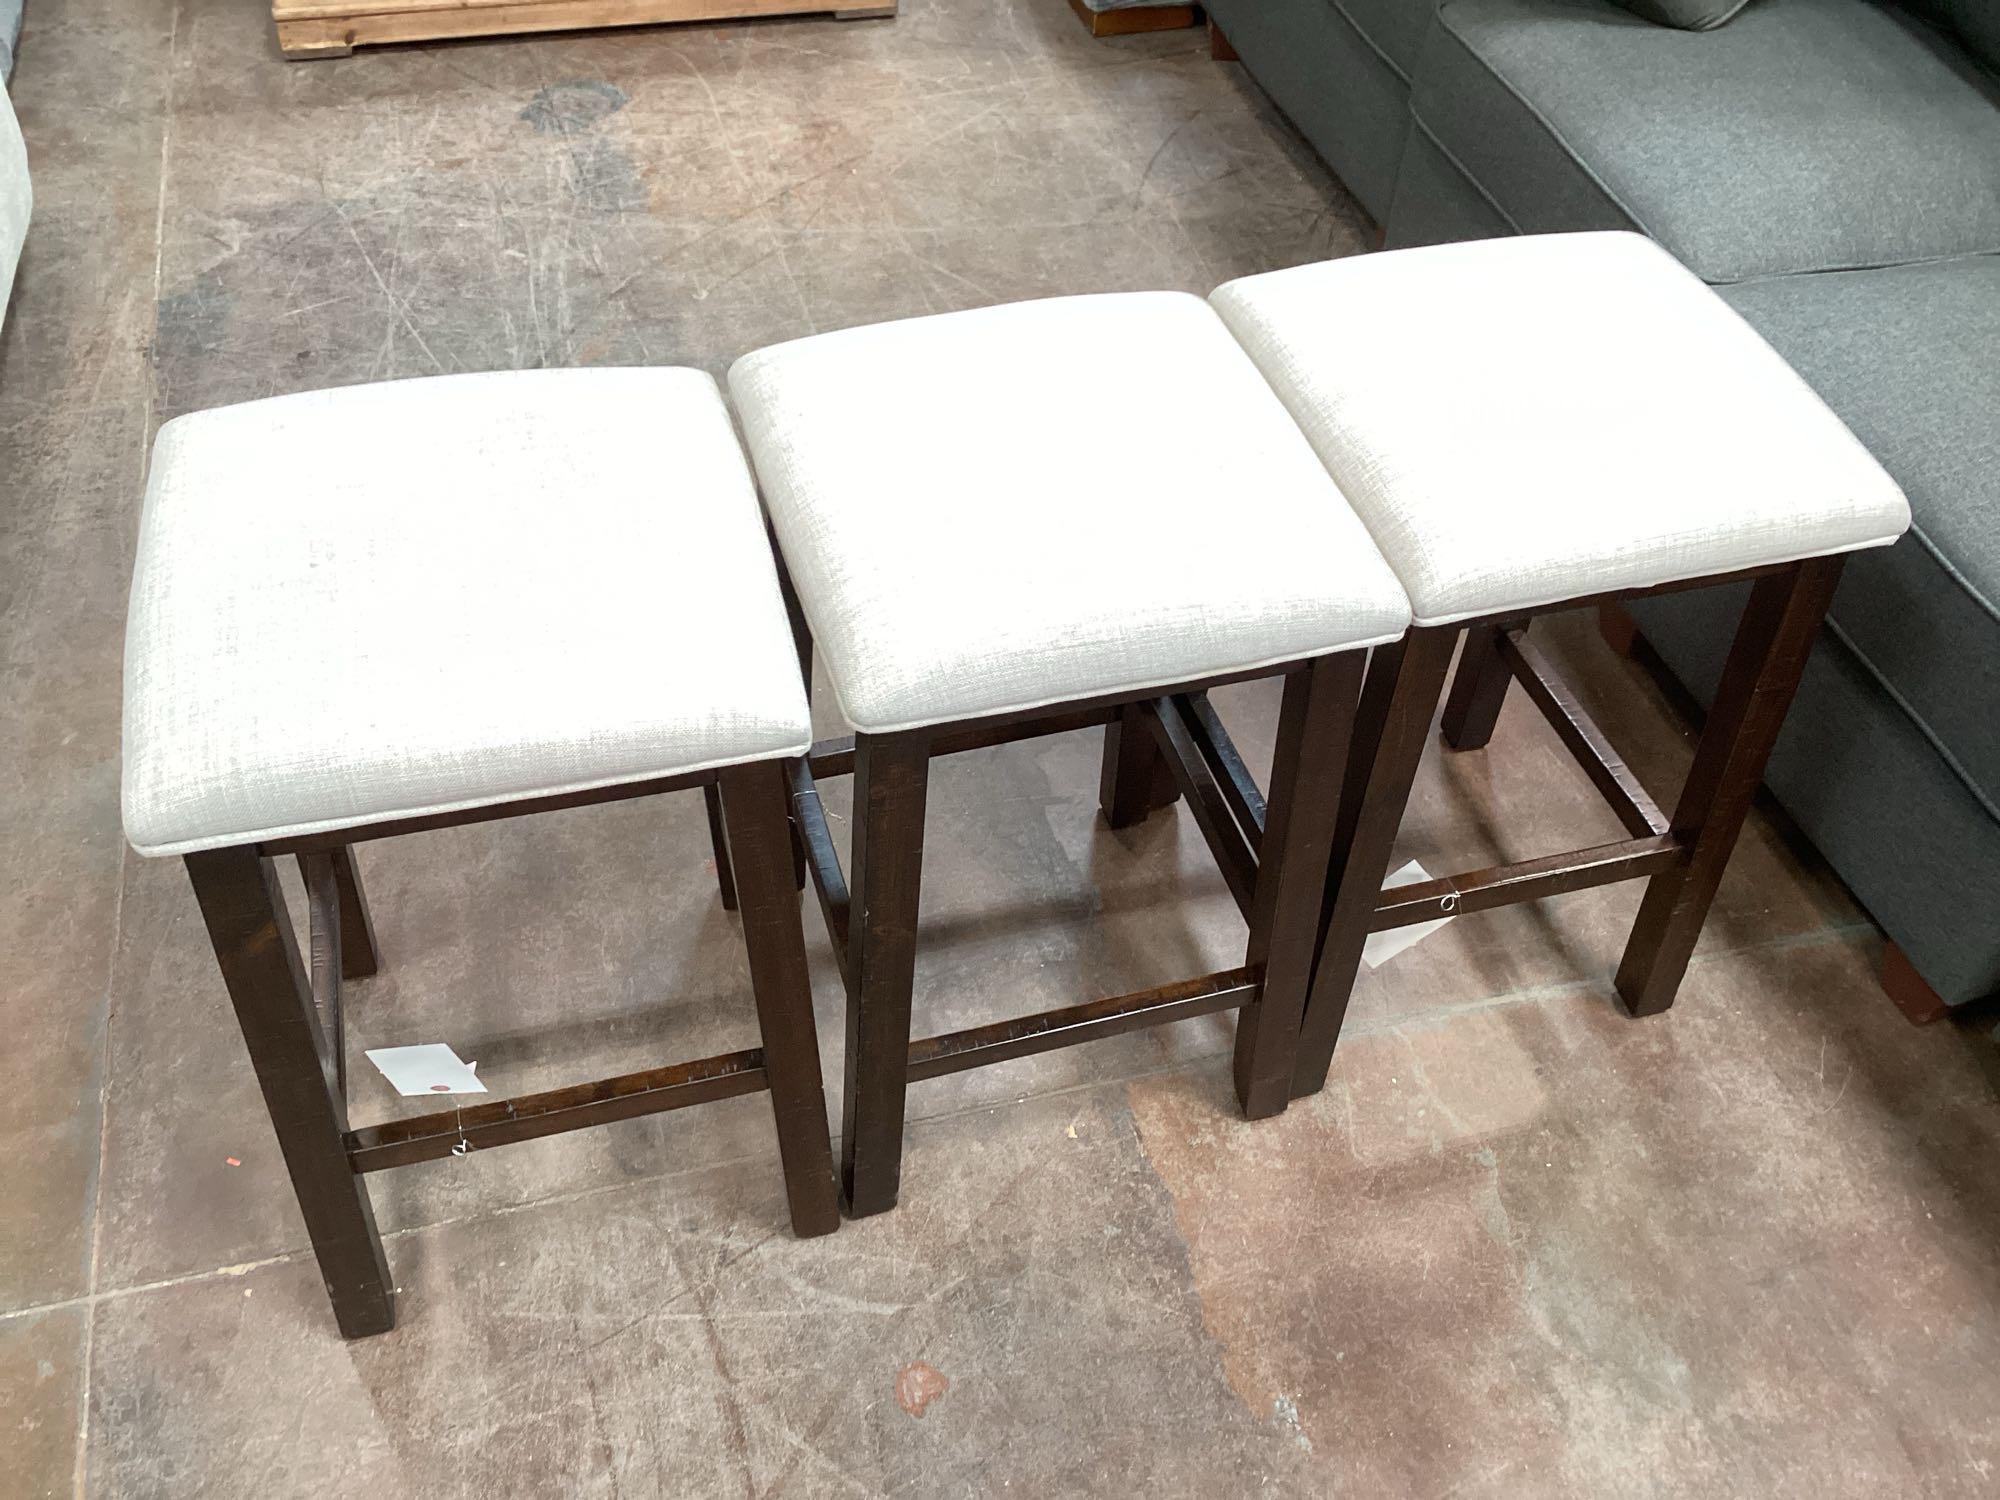 Wood Bar table with stools*DAMAGED *